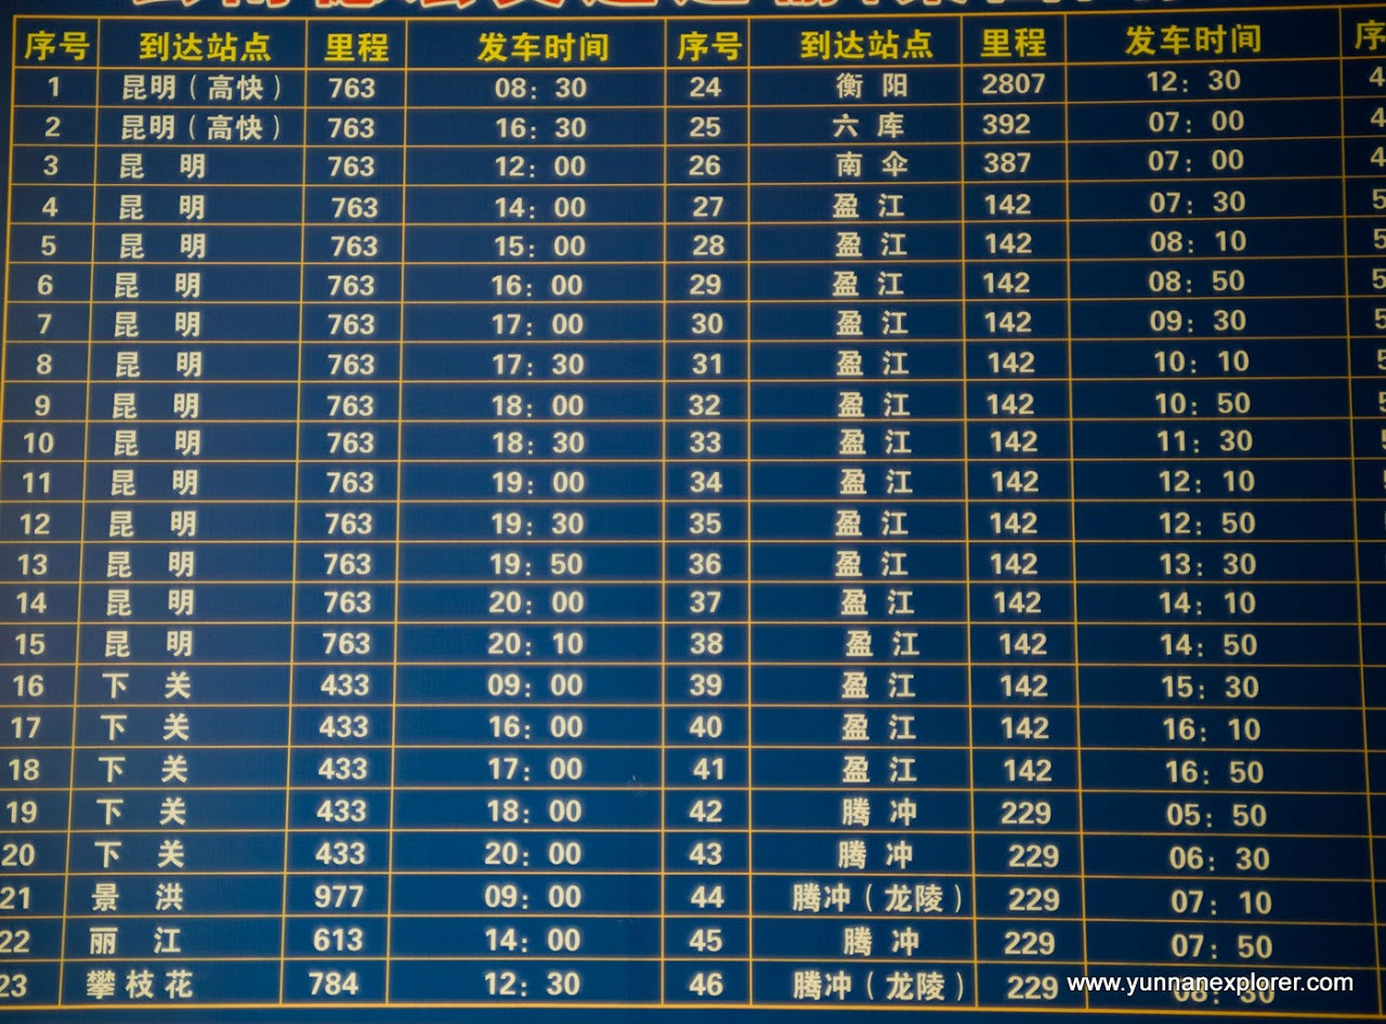 Picture: Busses to Kunming, Yingjiang and other long distance destinations. 